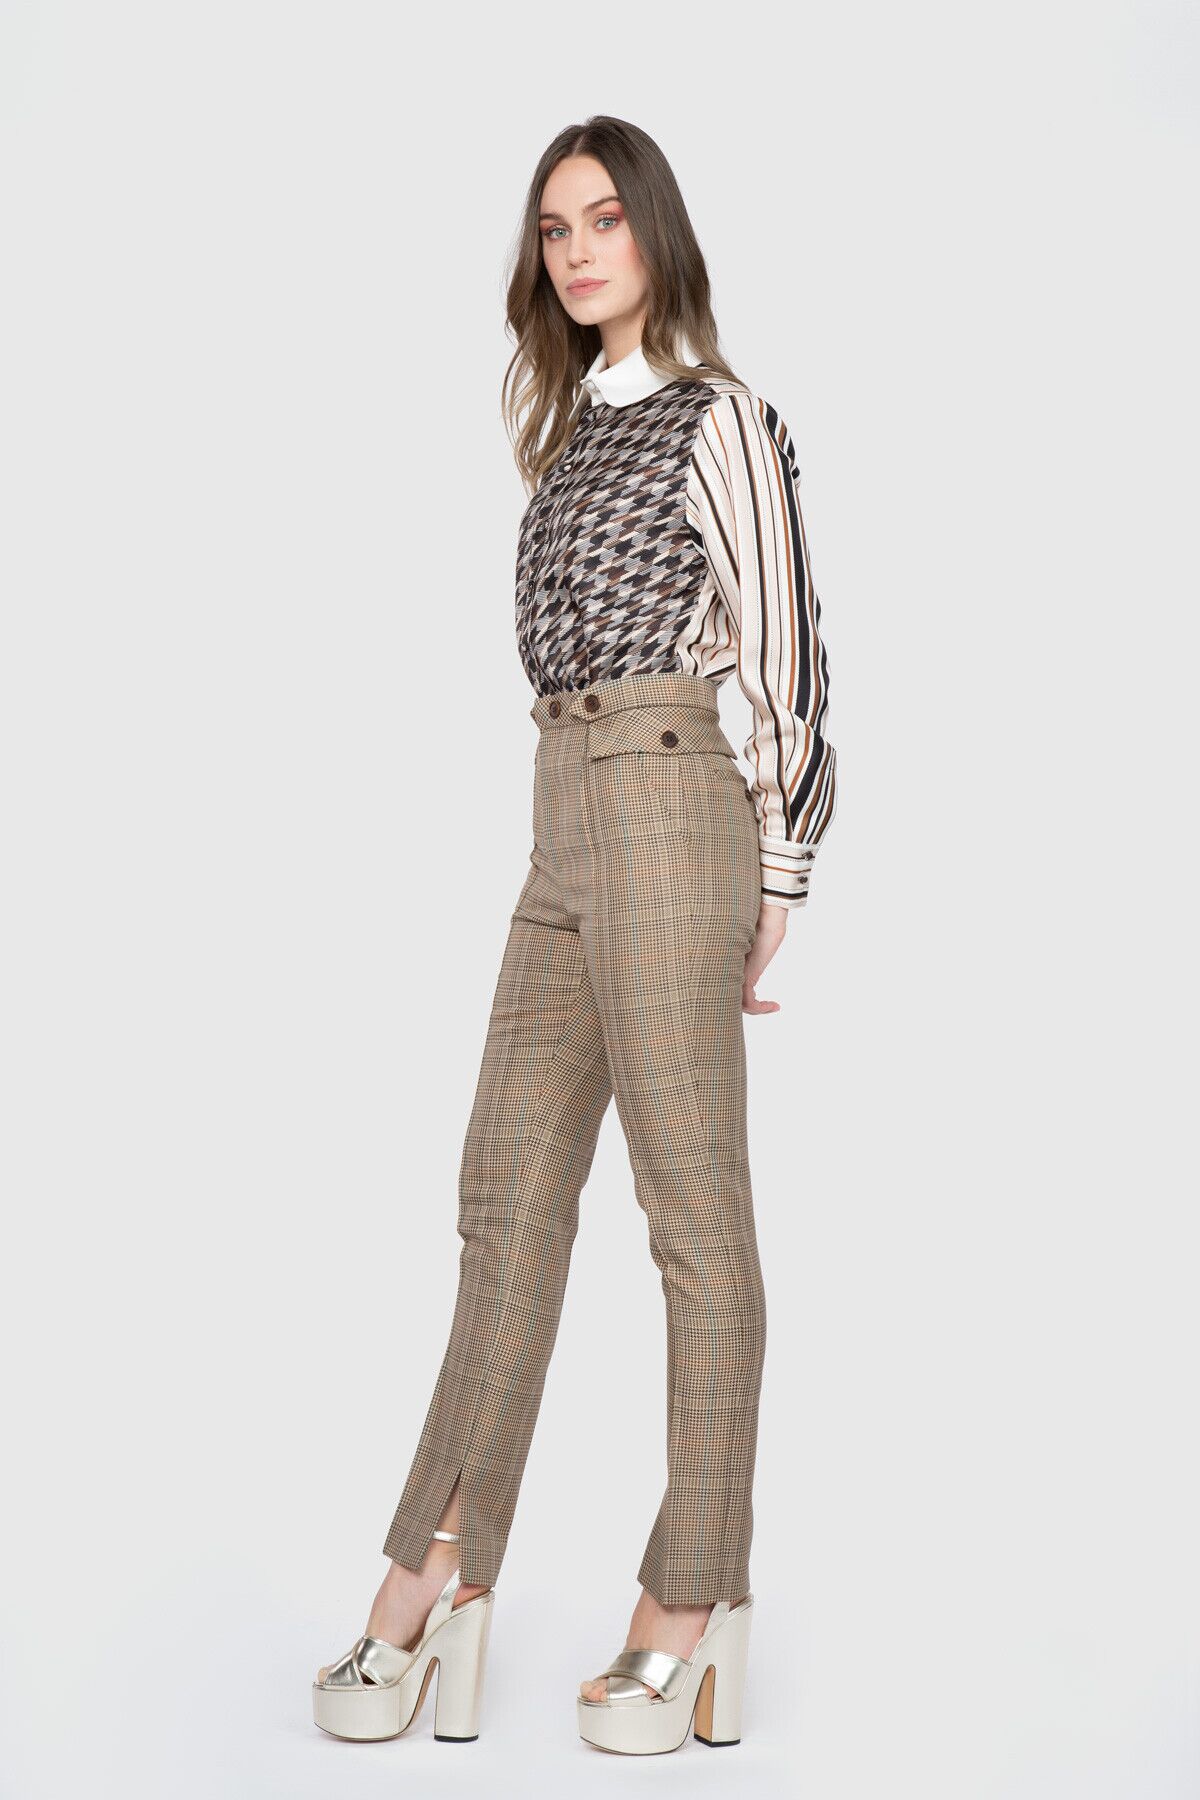 GIZIAGATE - Slit Detailed Plaid Beige Trousers